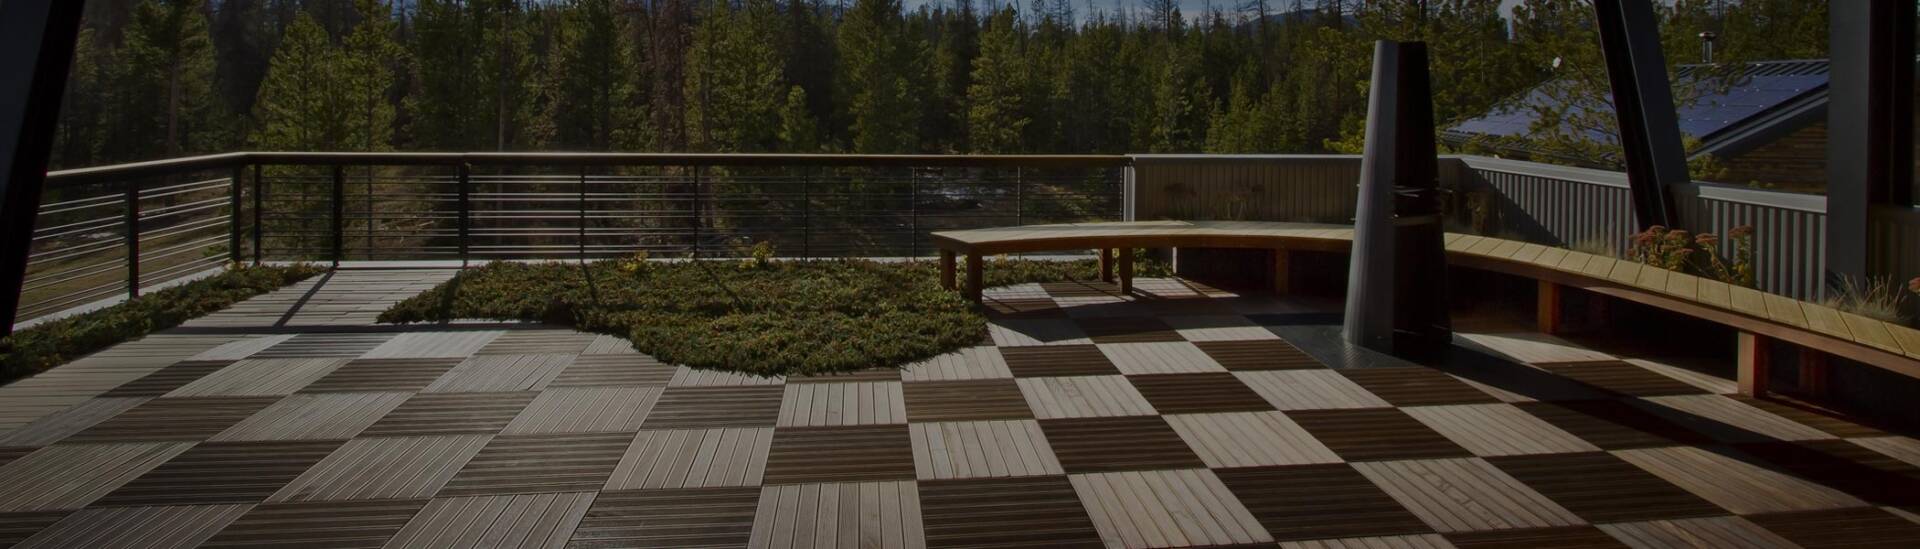 Checkered Wood Tiles on Rooftop